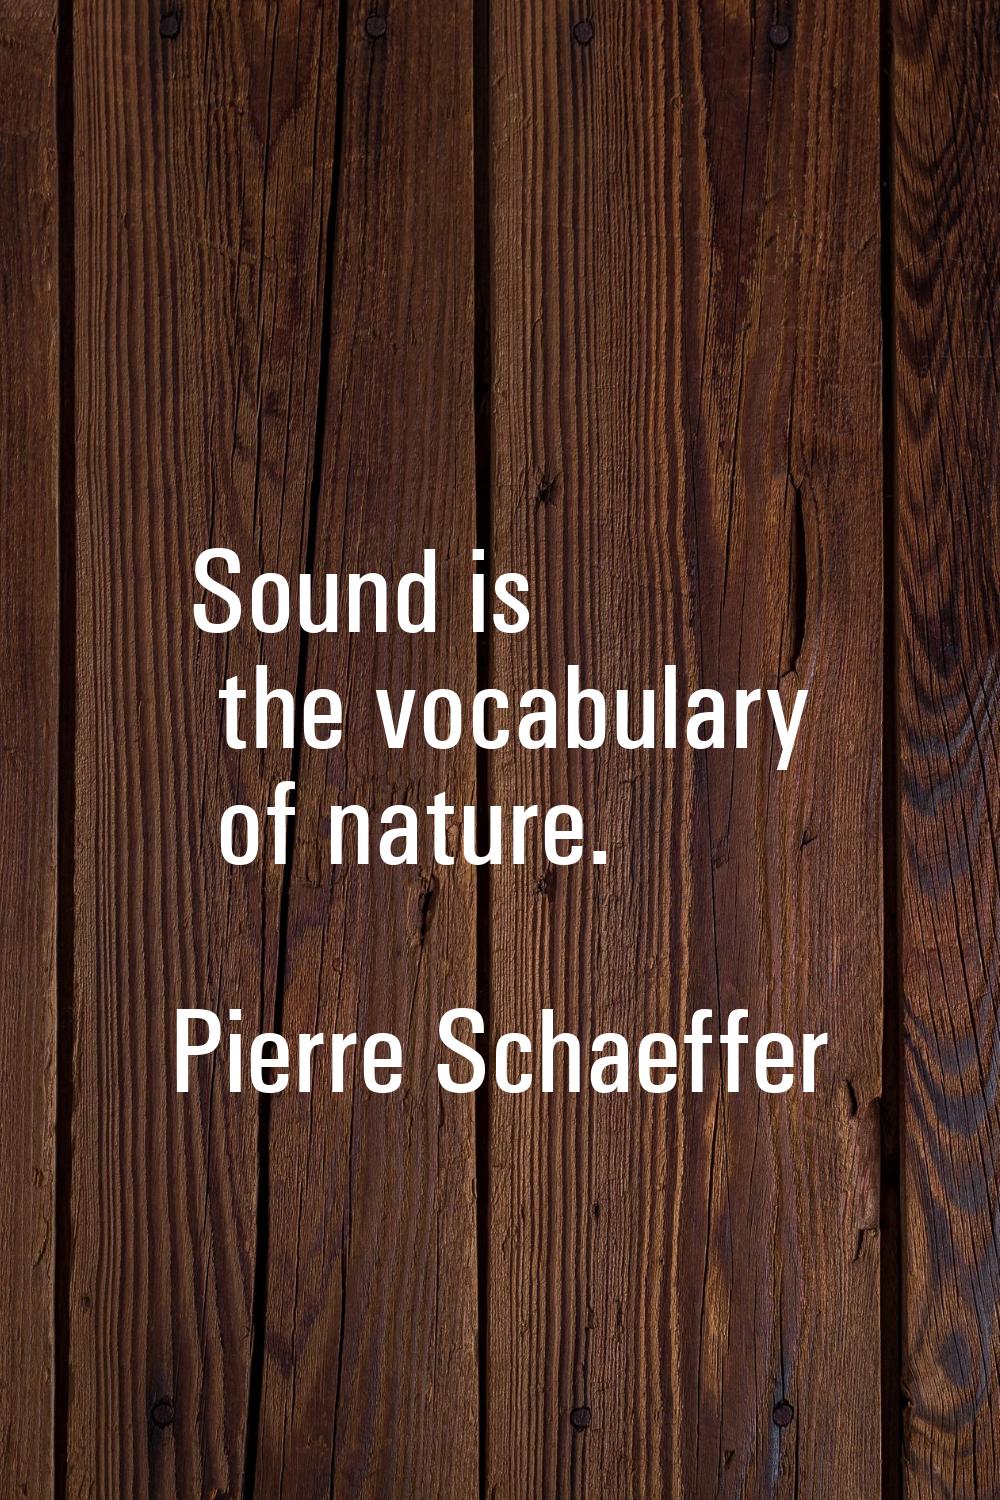 Sound is the vocabulary of nature.